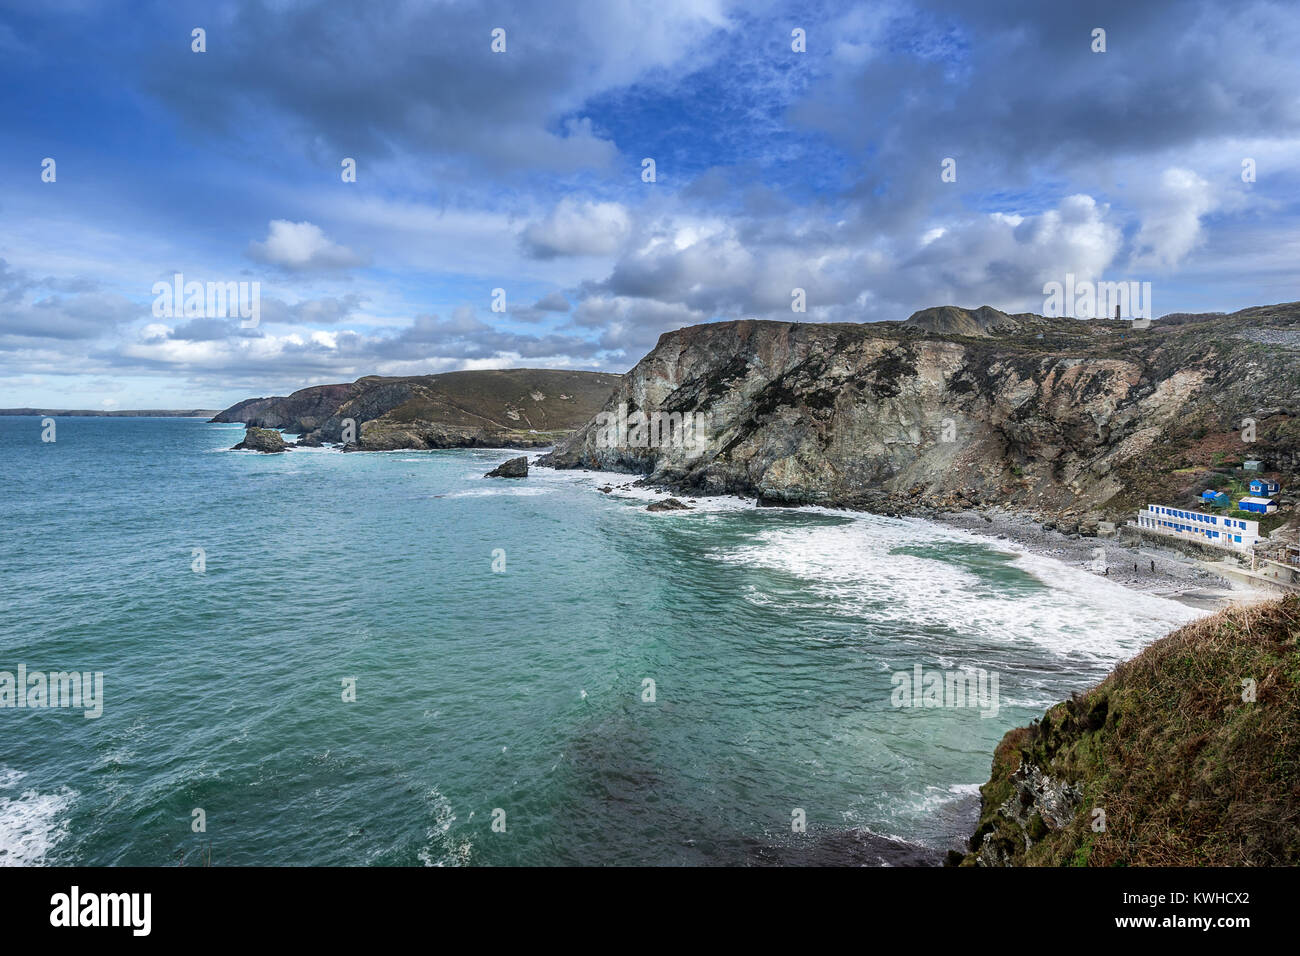 St Agnes in Cornwall. Stockfoto